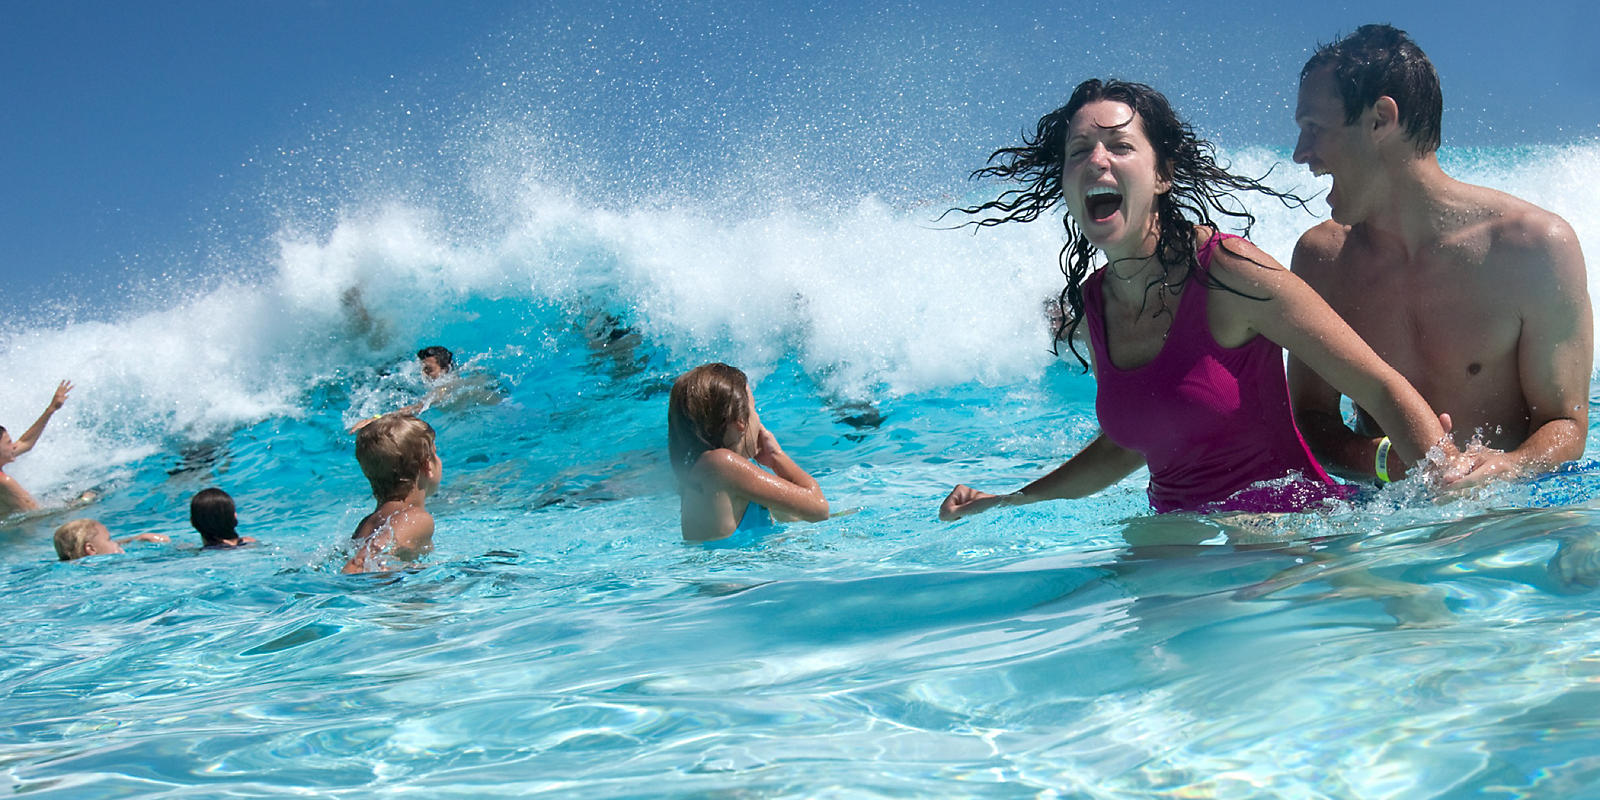 Couple and kids in wave pool